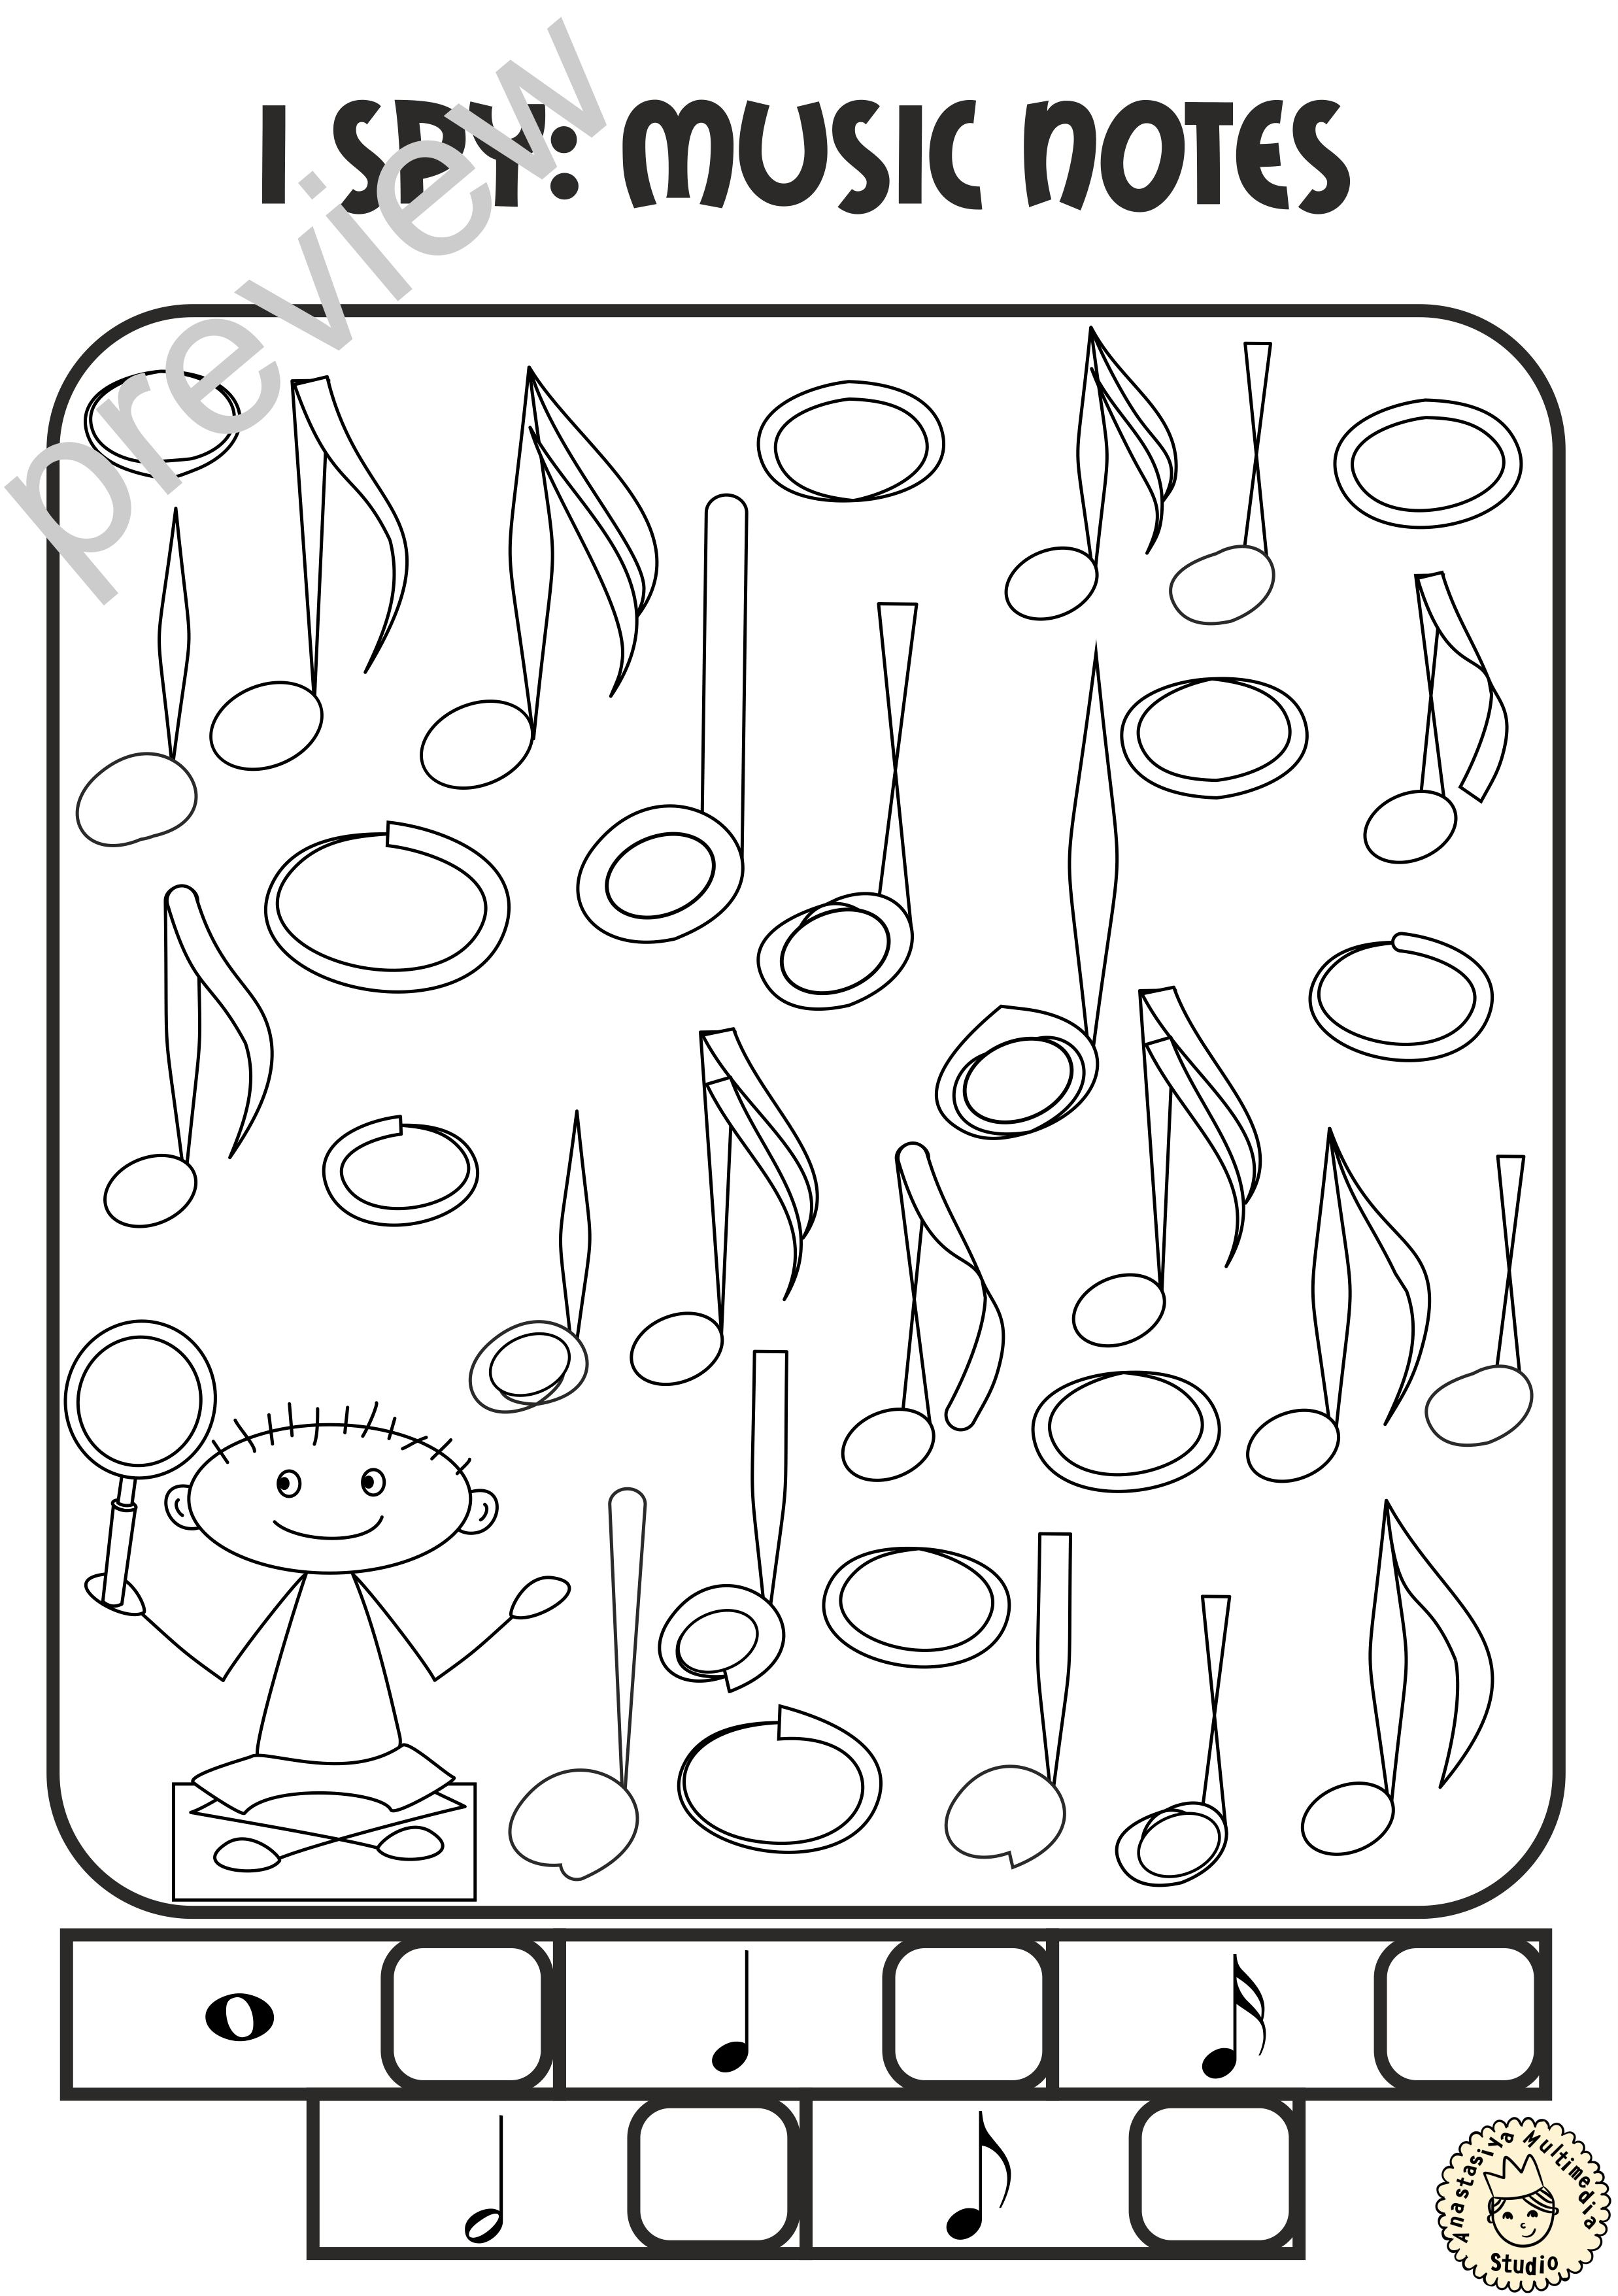 I Spy Music Notes and Symbols Coloring Games (img # 1)